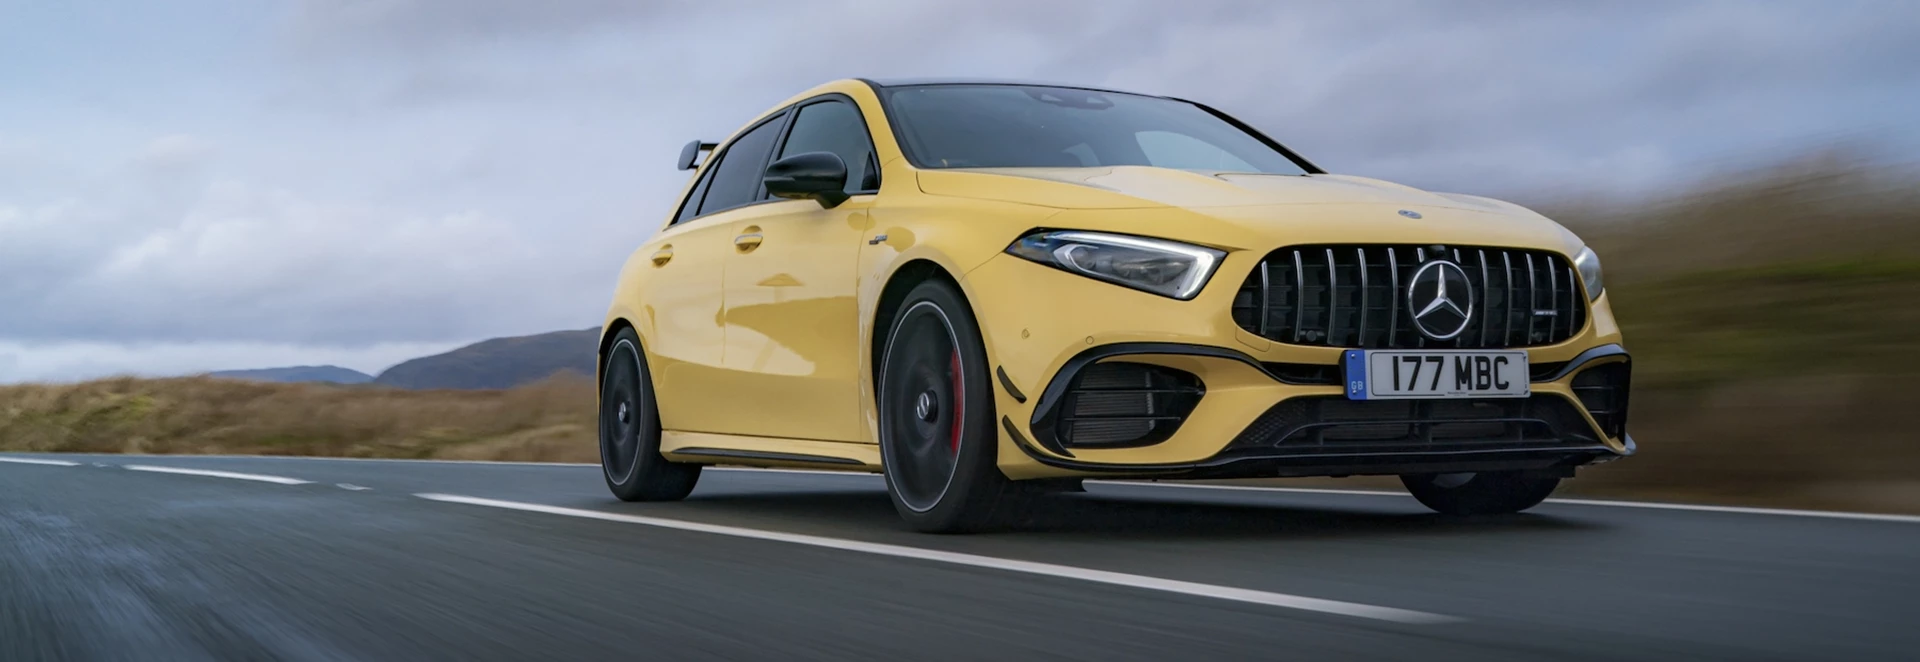 Mercedes-AMG A45 S Review 2021 